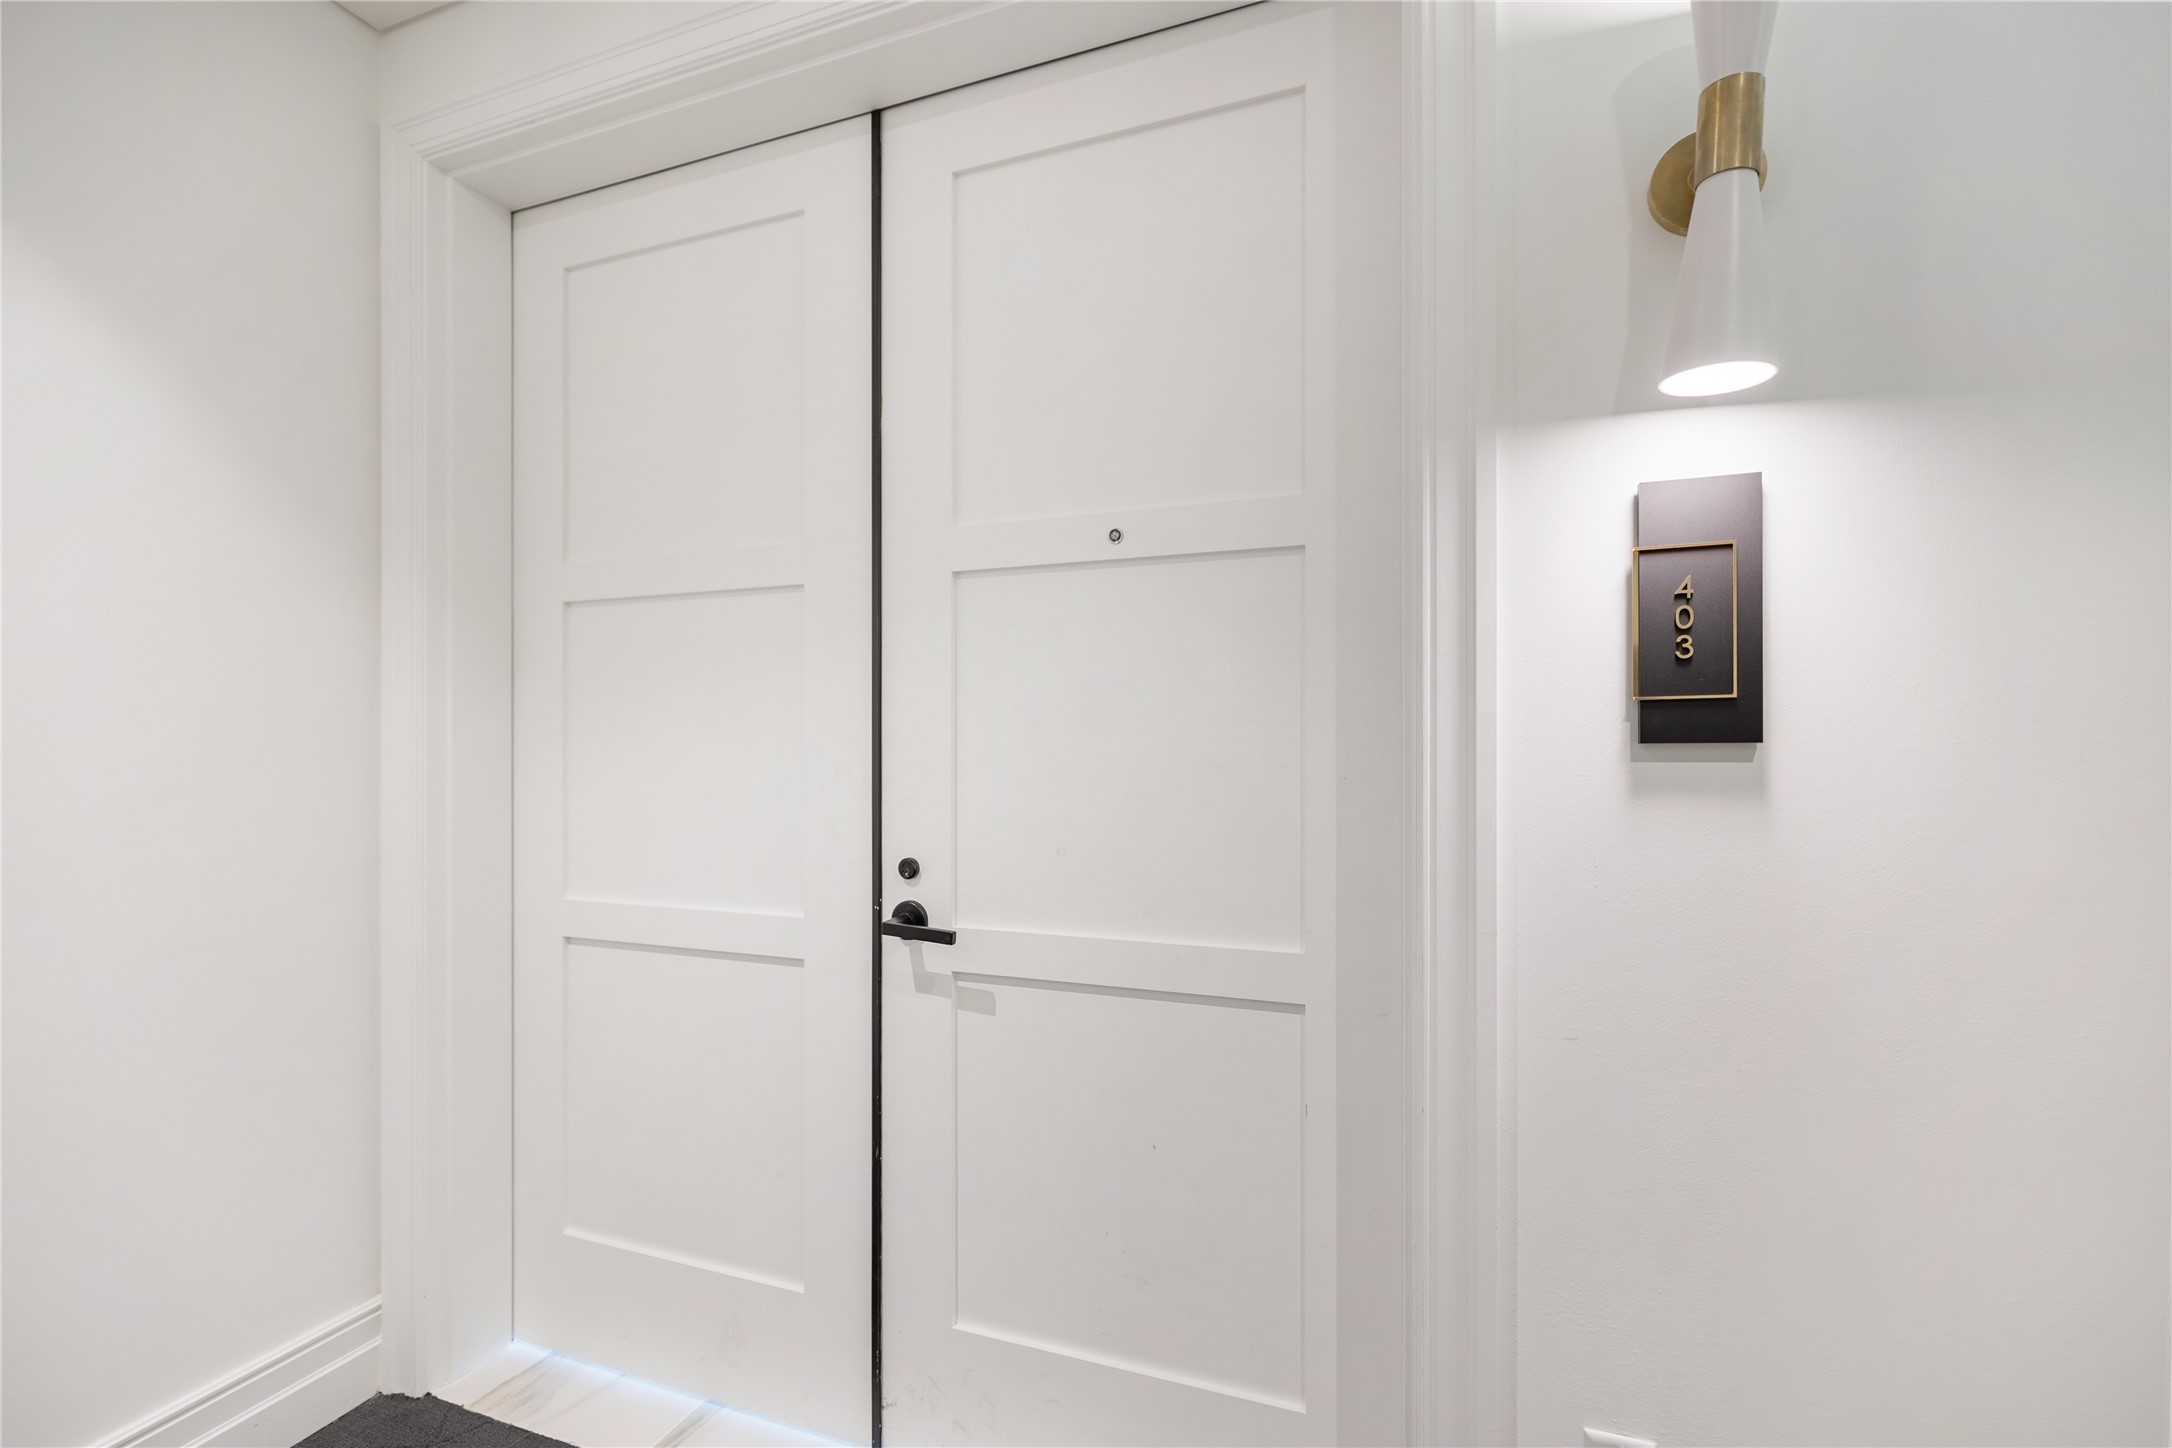 Residence 403 has easy access to elevator. What a grand double entrance.